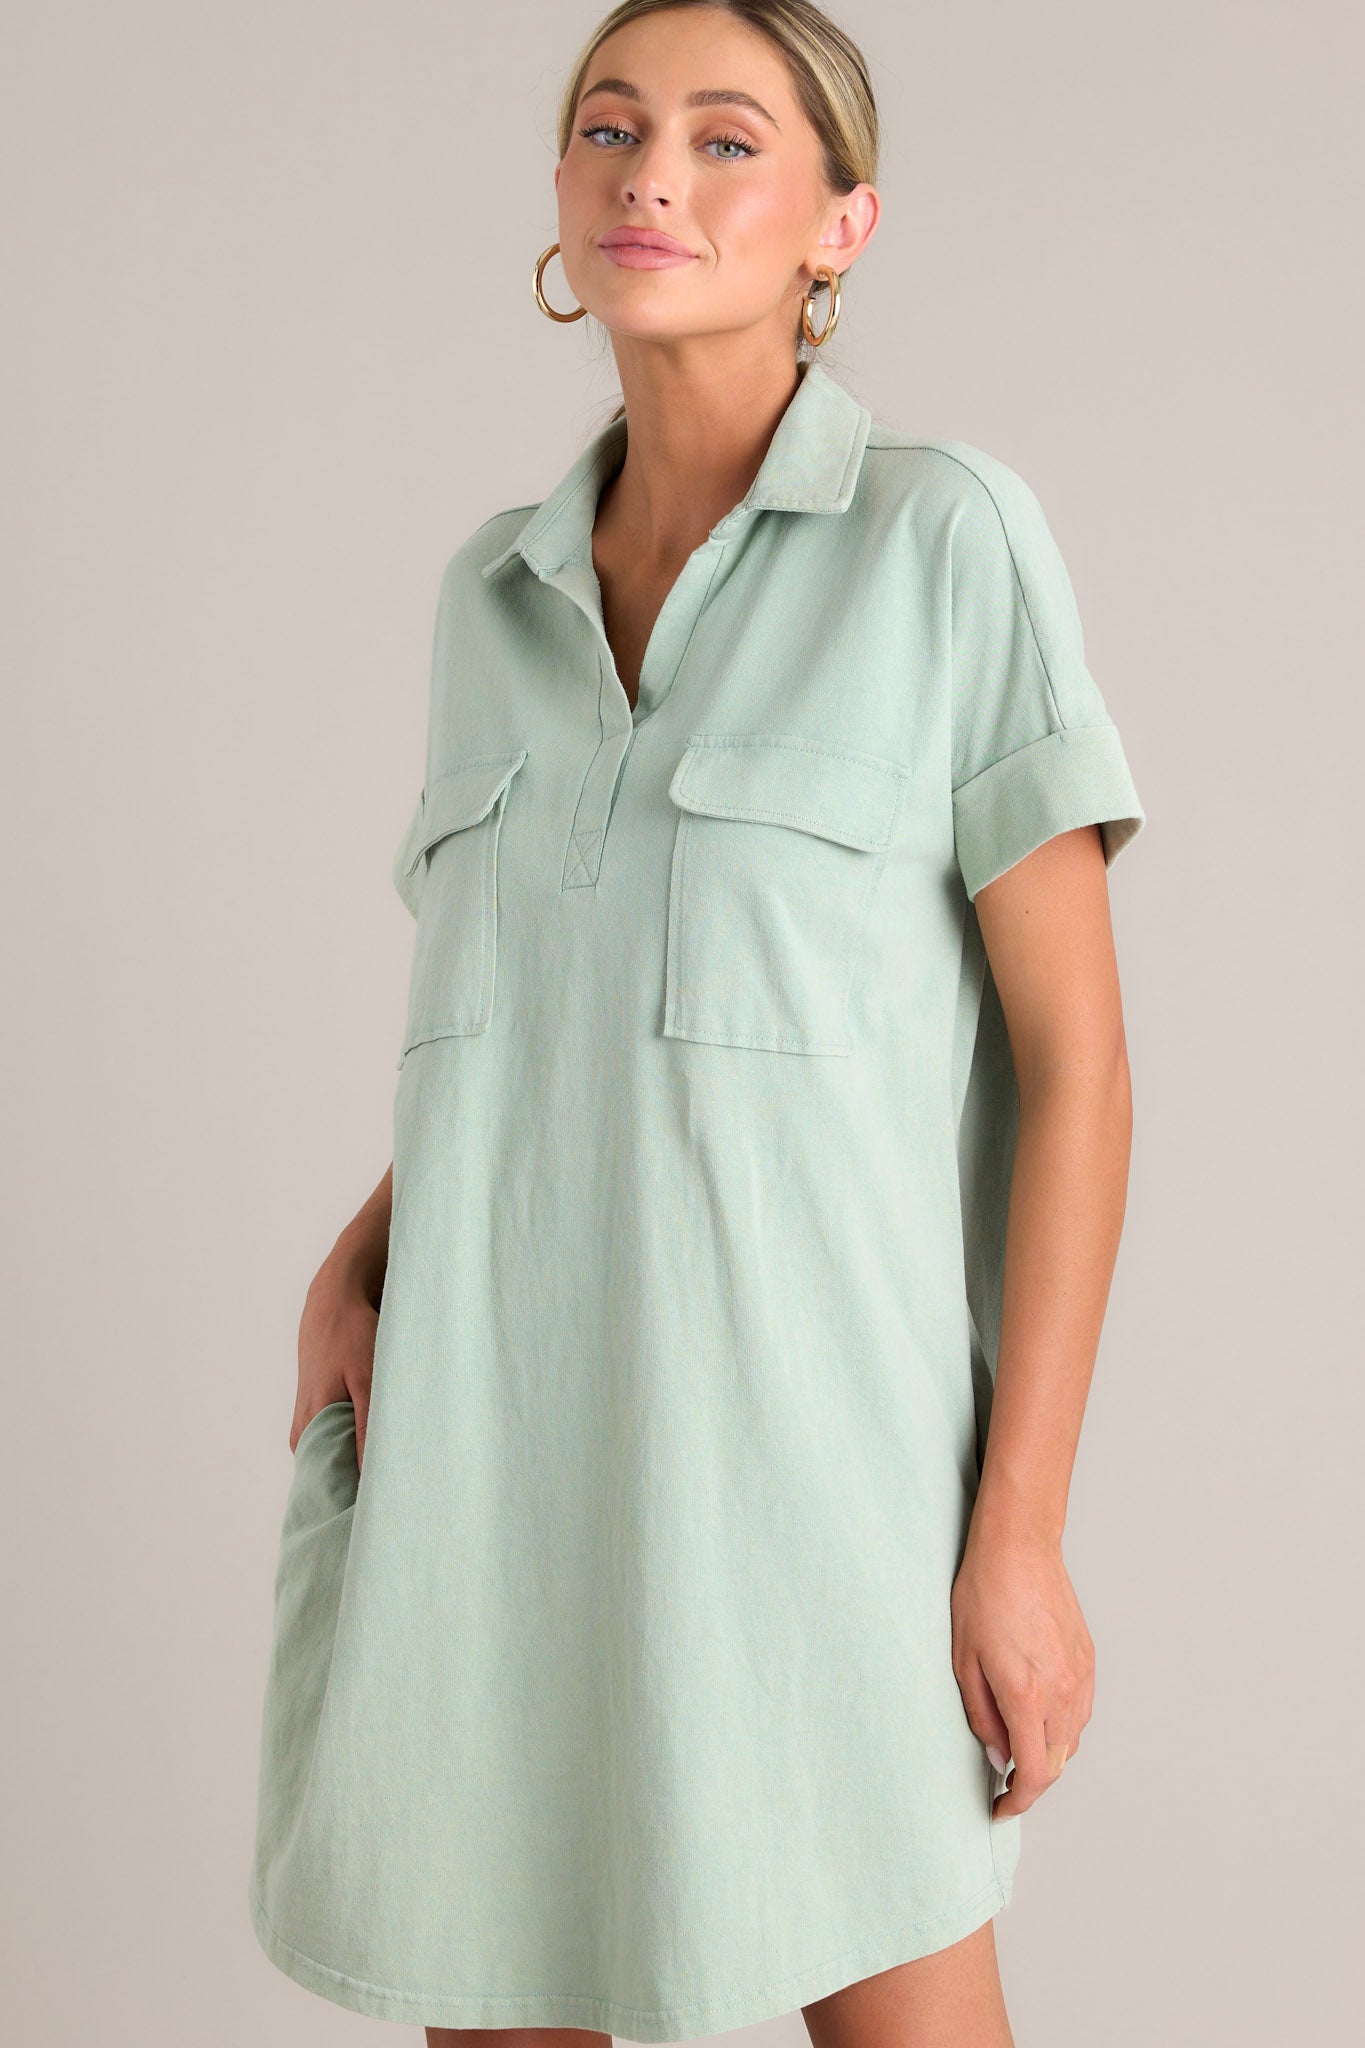 Action shot of a sage green mini dress with a collared neckline, functional breast and hip pockets, relaxed fit, and cuffed short sleeves, highlighting the fit and design.